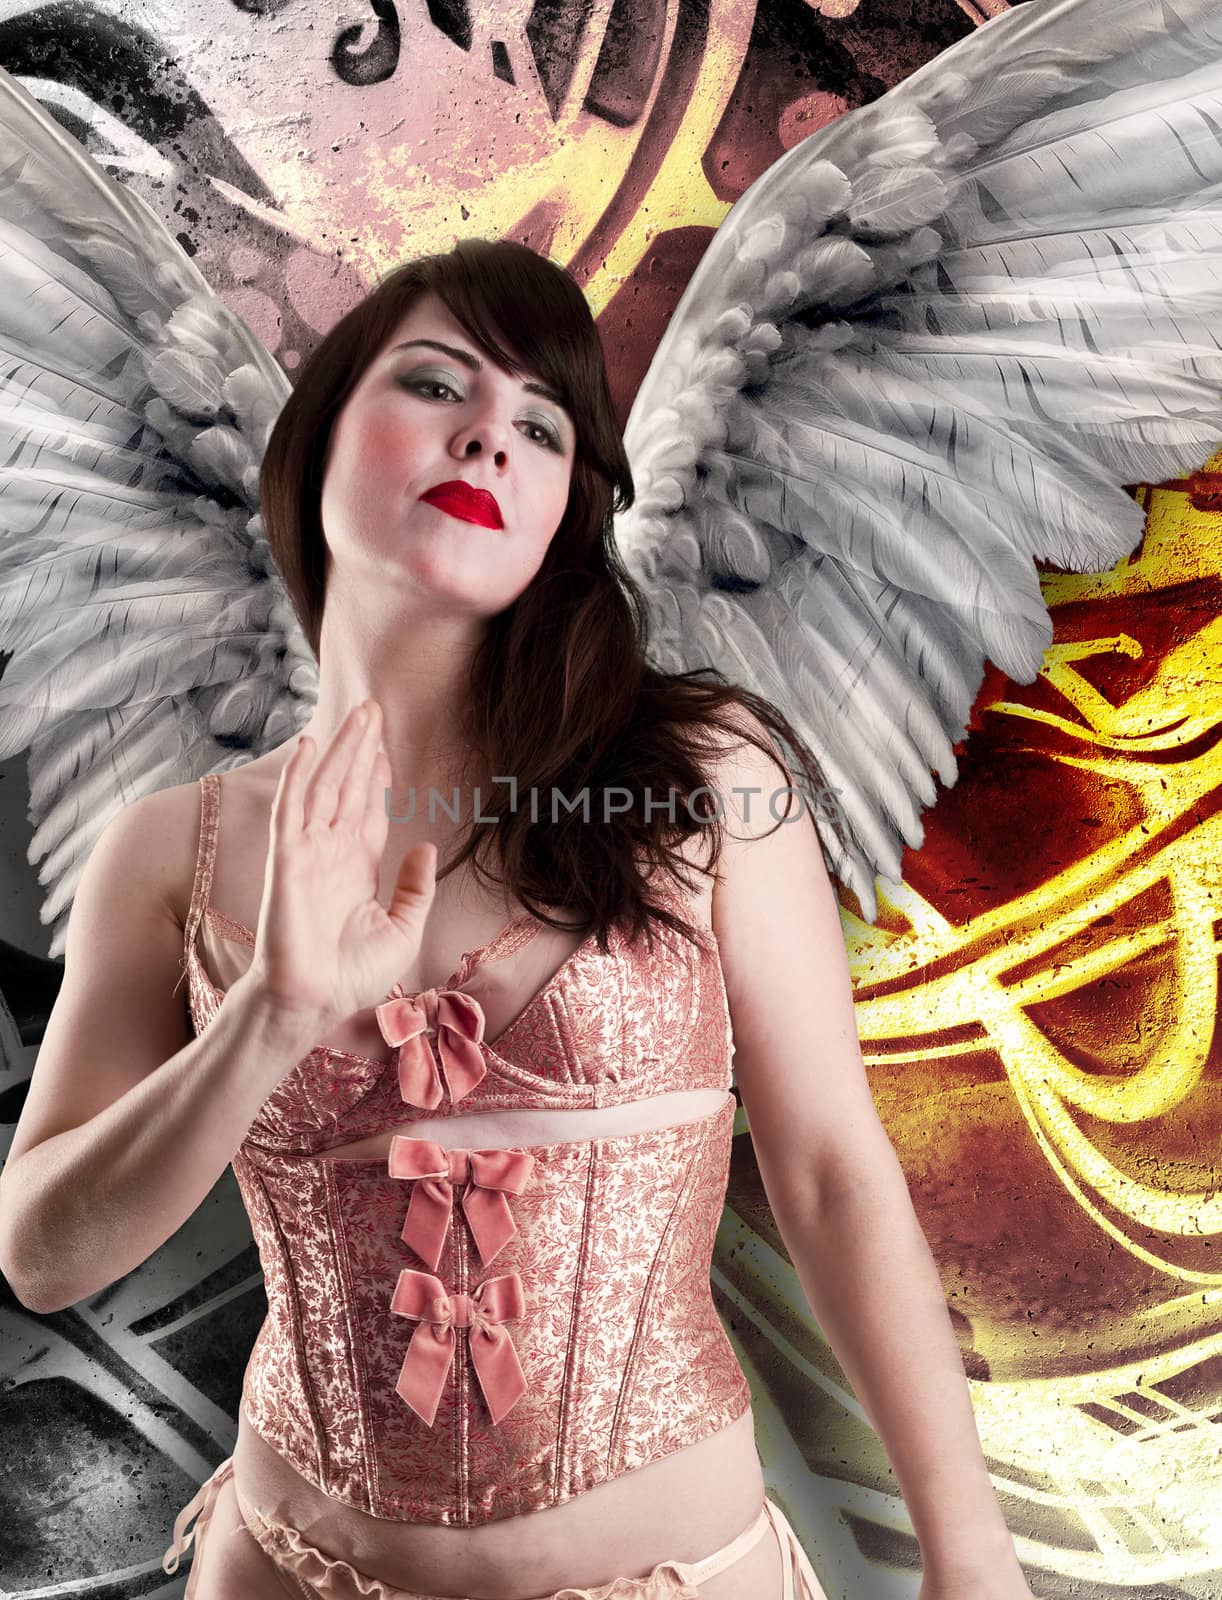 Sweet woman angel in lingerie, over graffiti background. by FernandoCortes